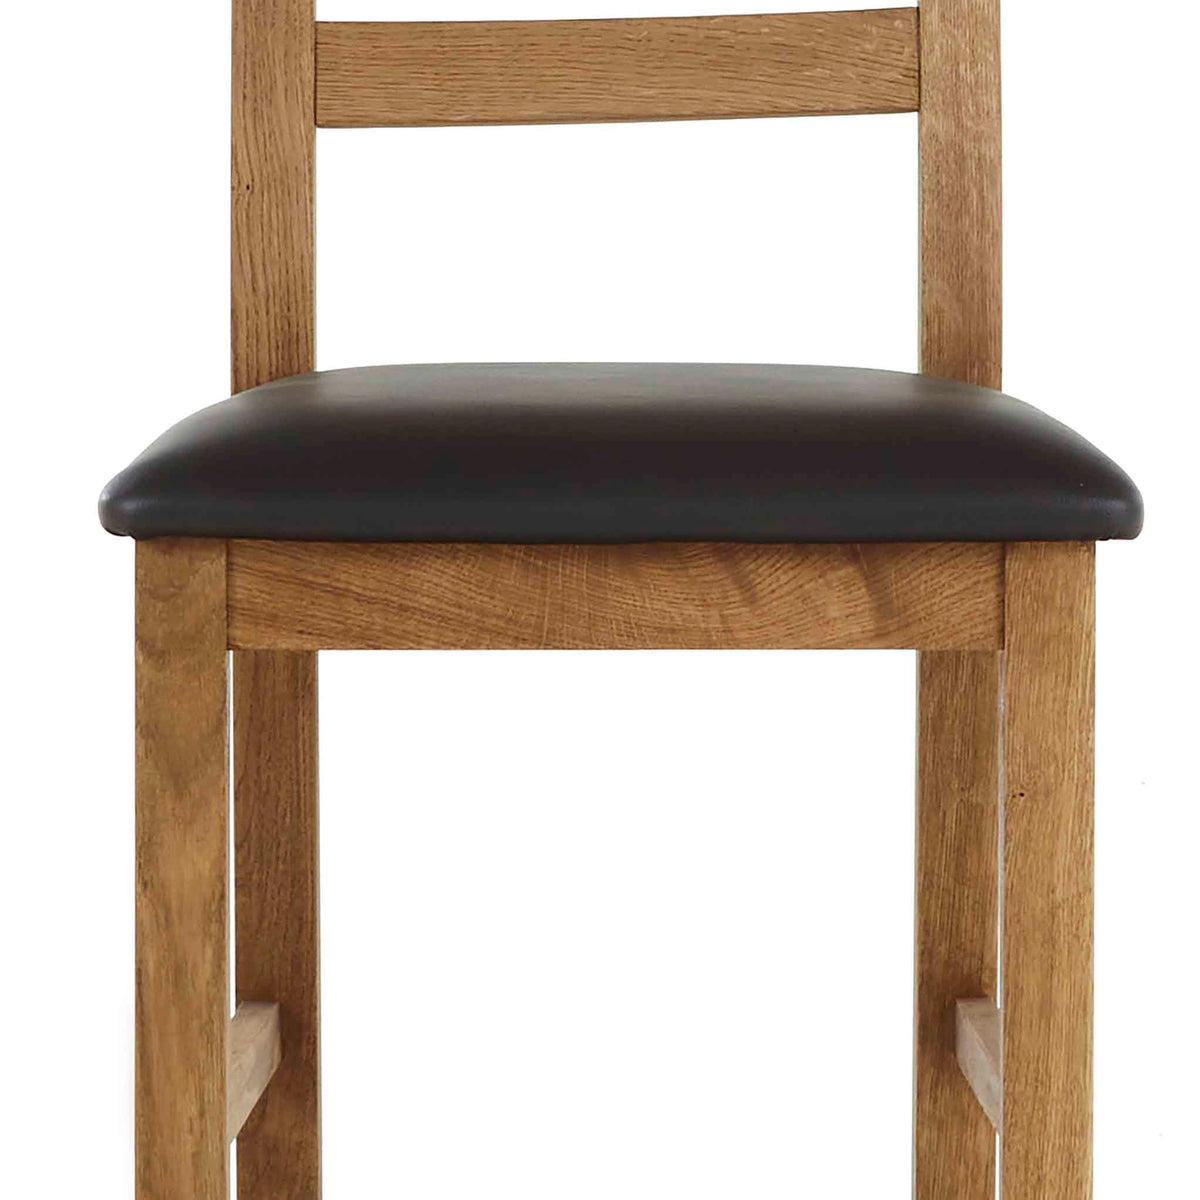 Harvey Dining Chair - Brown Faux Leather